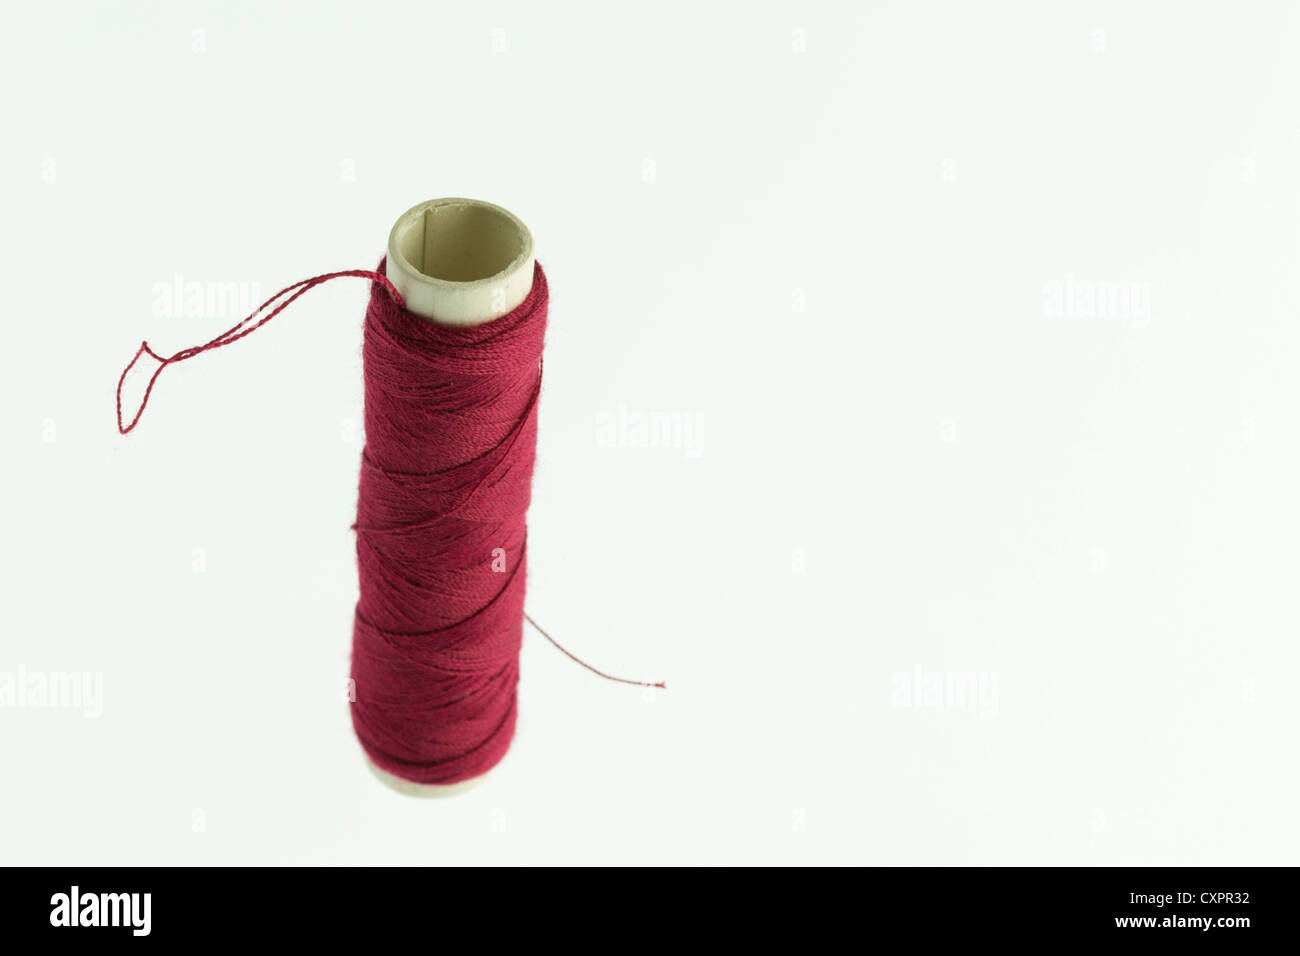 Reel or red polyester thread Stock Photo